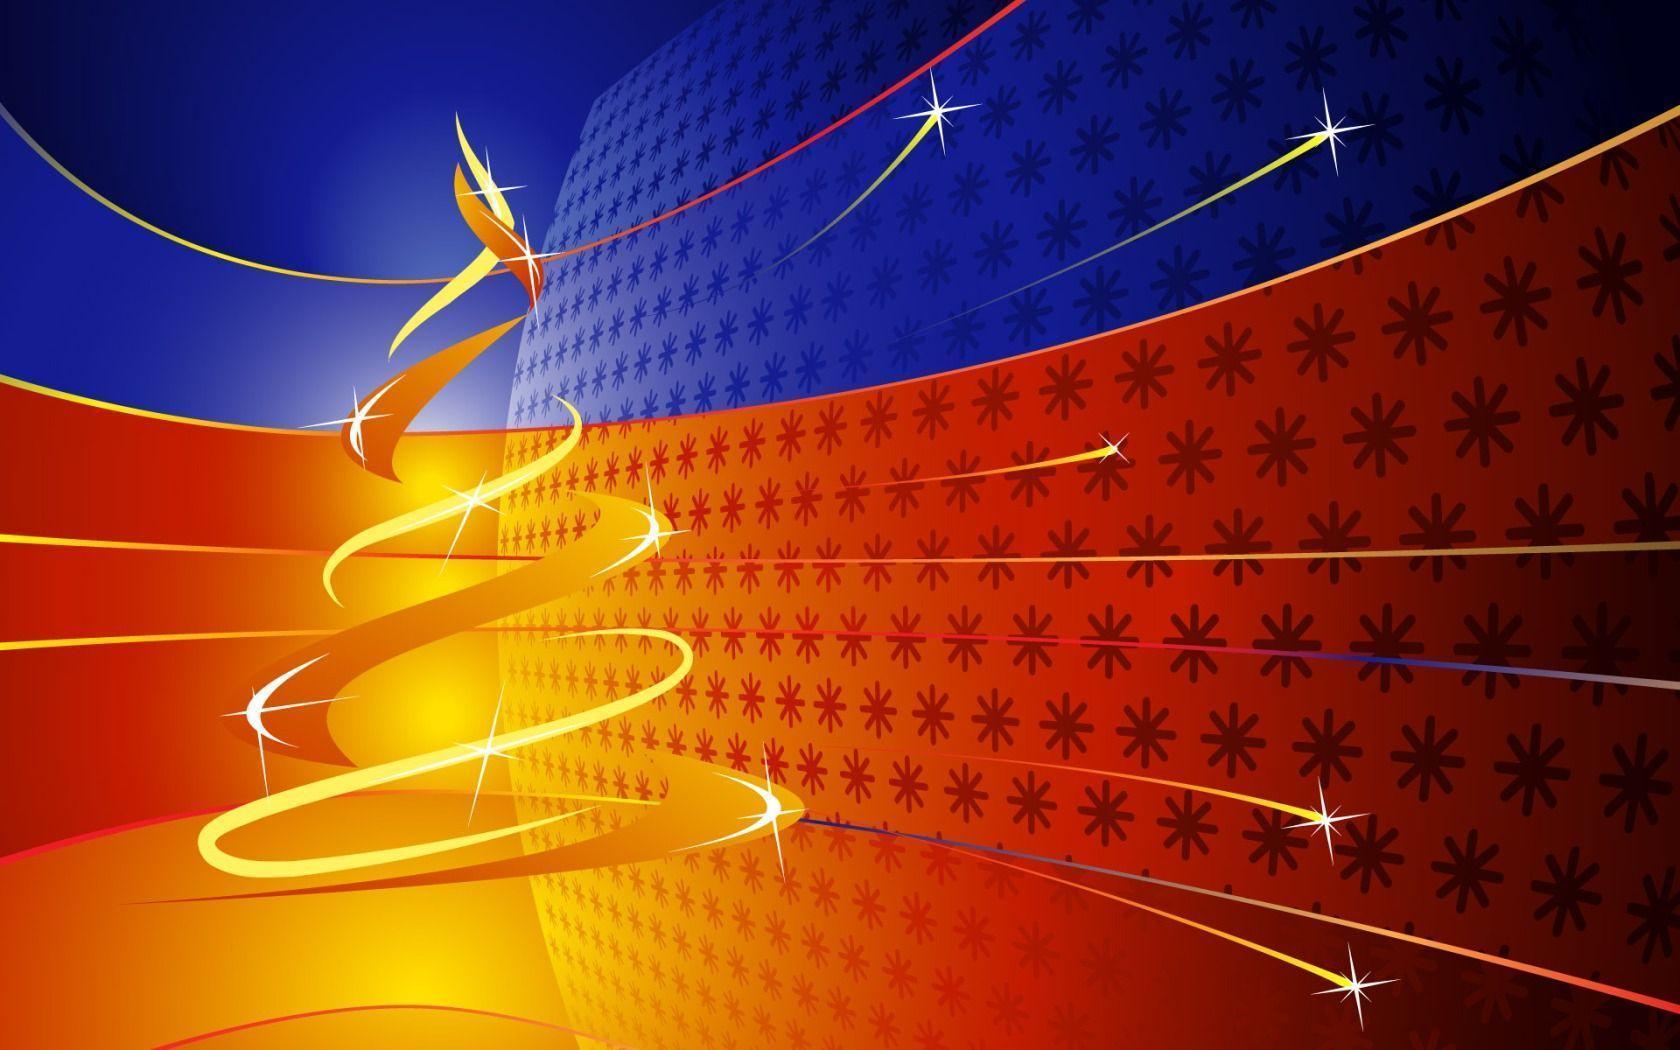 Christmas Design in Red, Blue and Yellow Colors widescreen